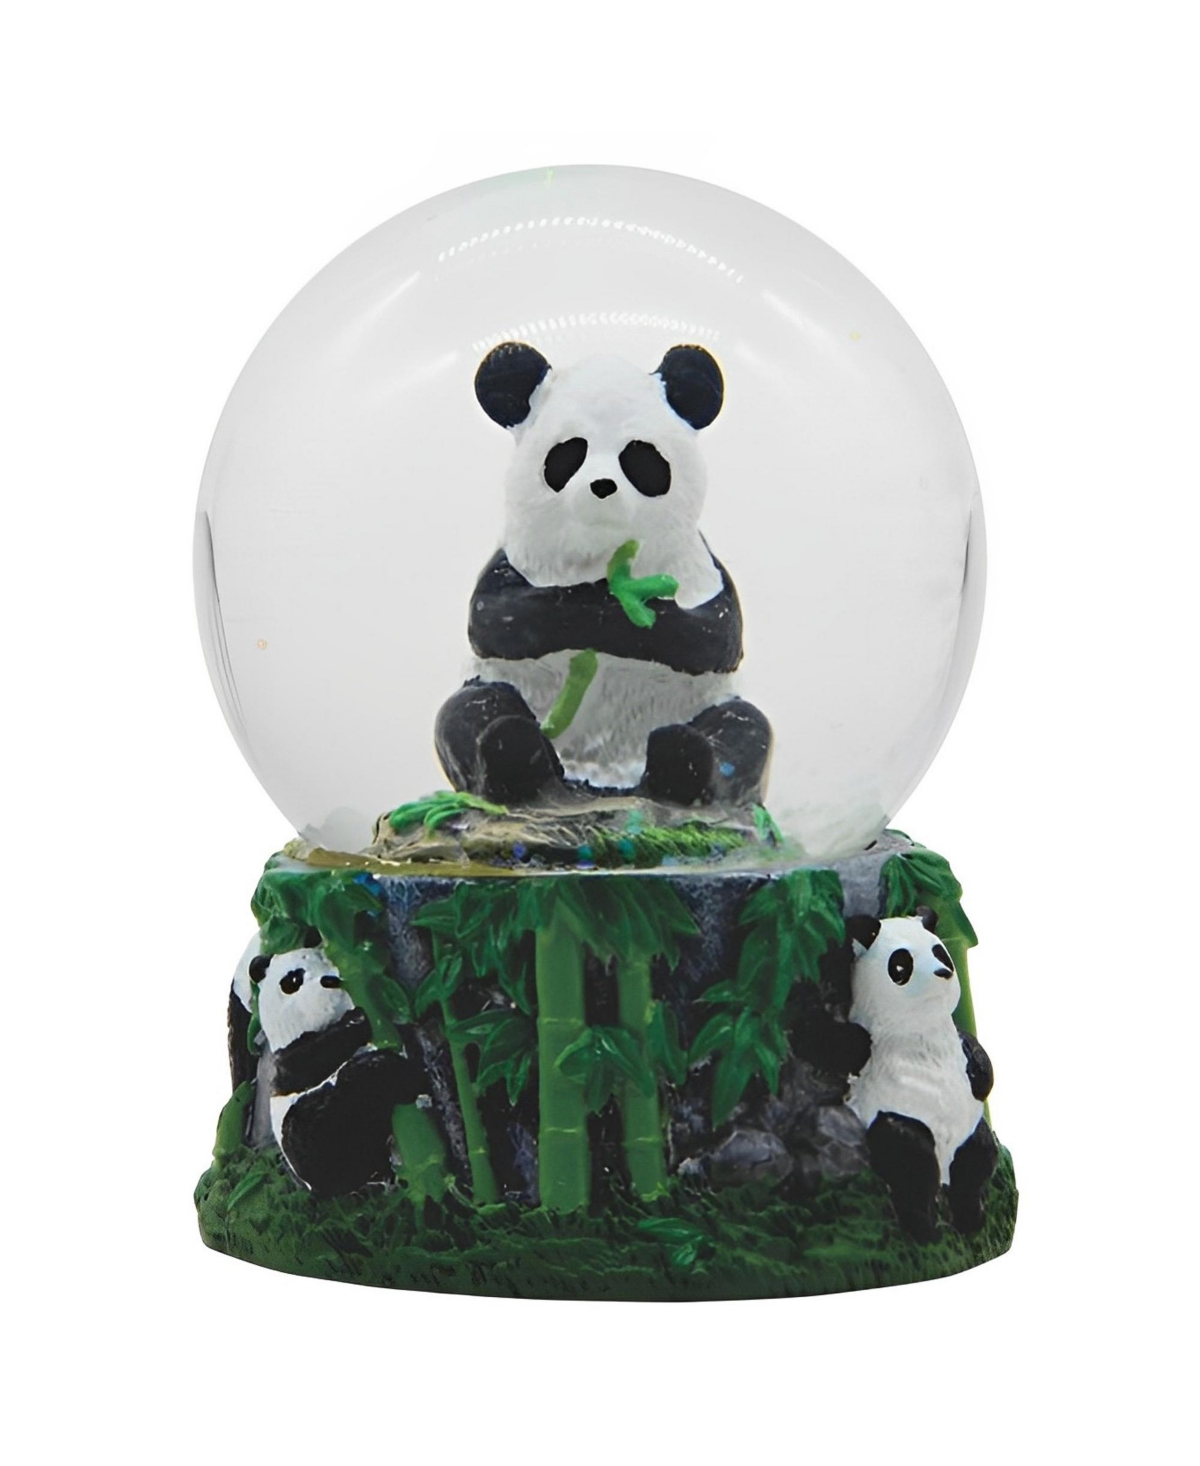 3.5"H Panda Glitter Snow Globe Figurine Home Decor Perfect Gift for House Warming, Holidays and Birthdays - Multicolor